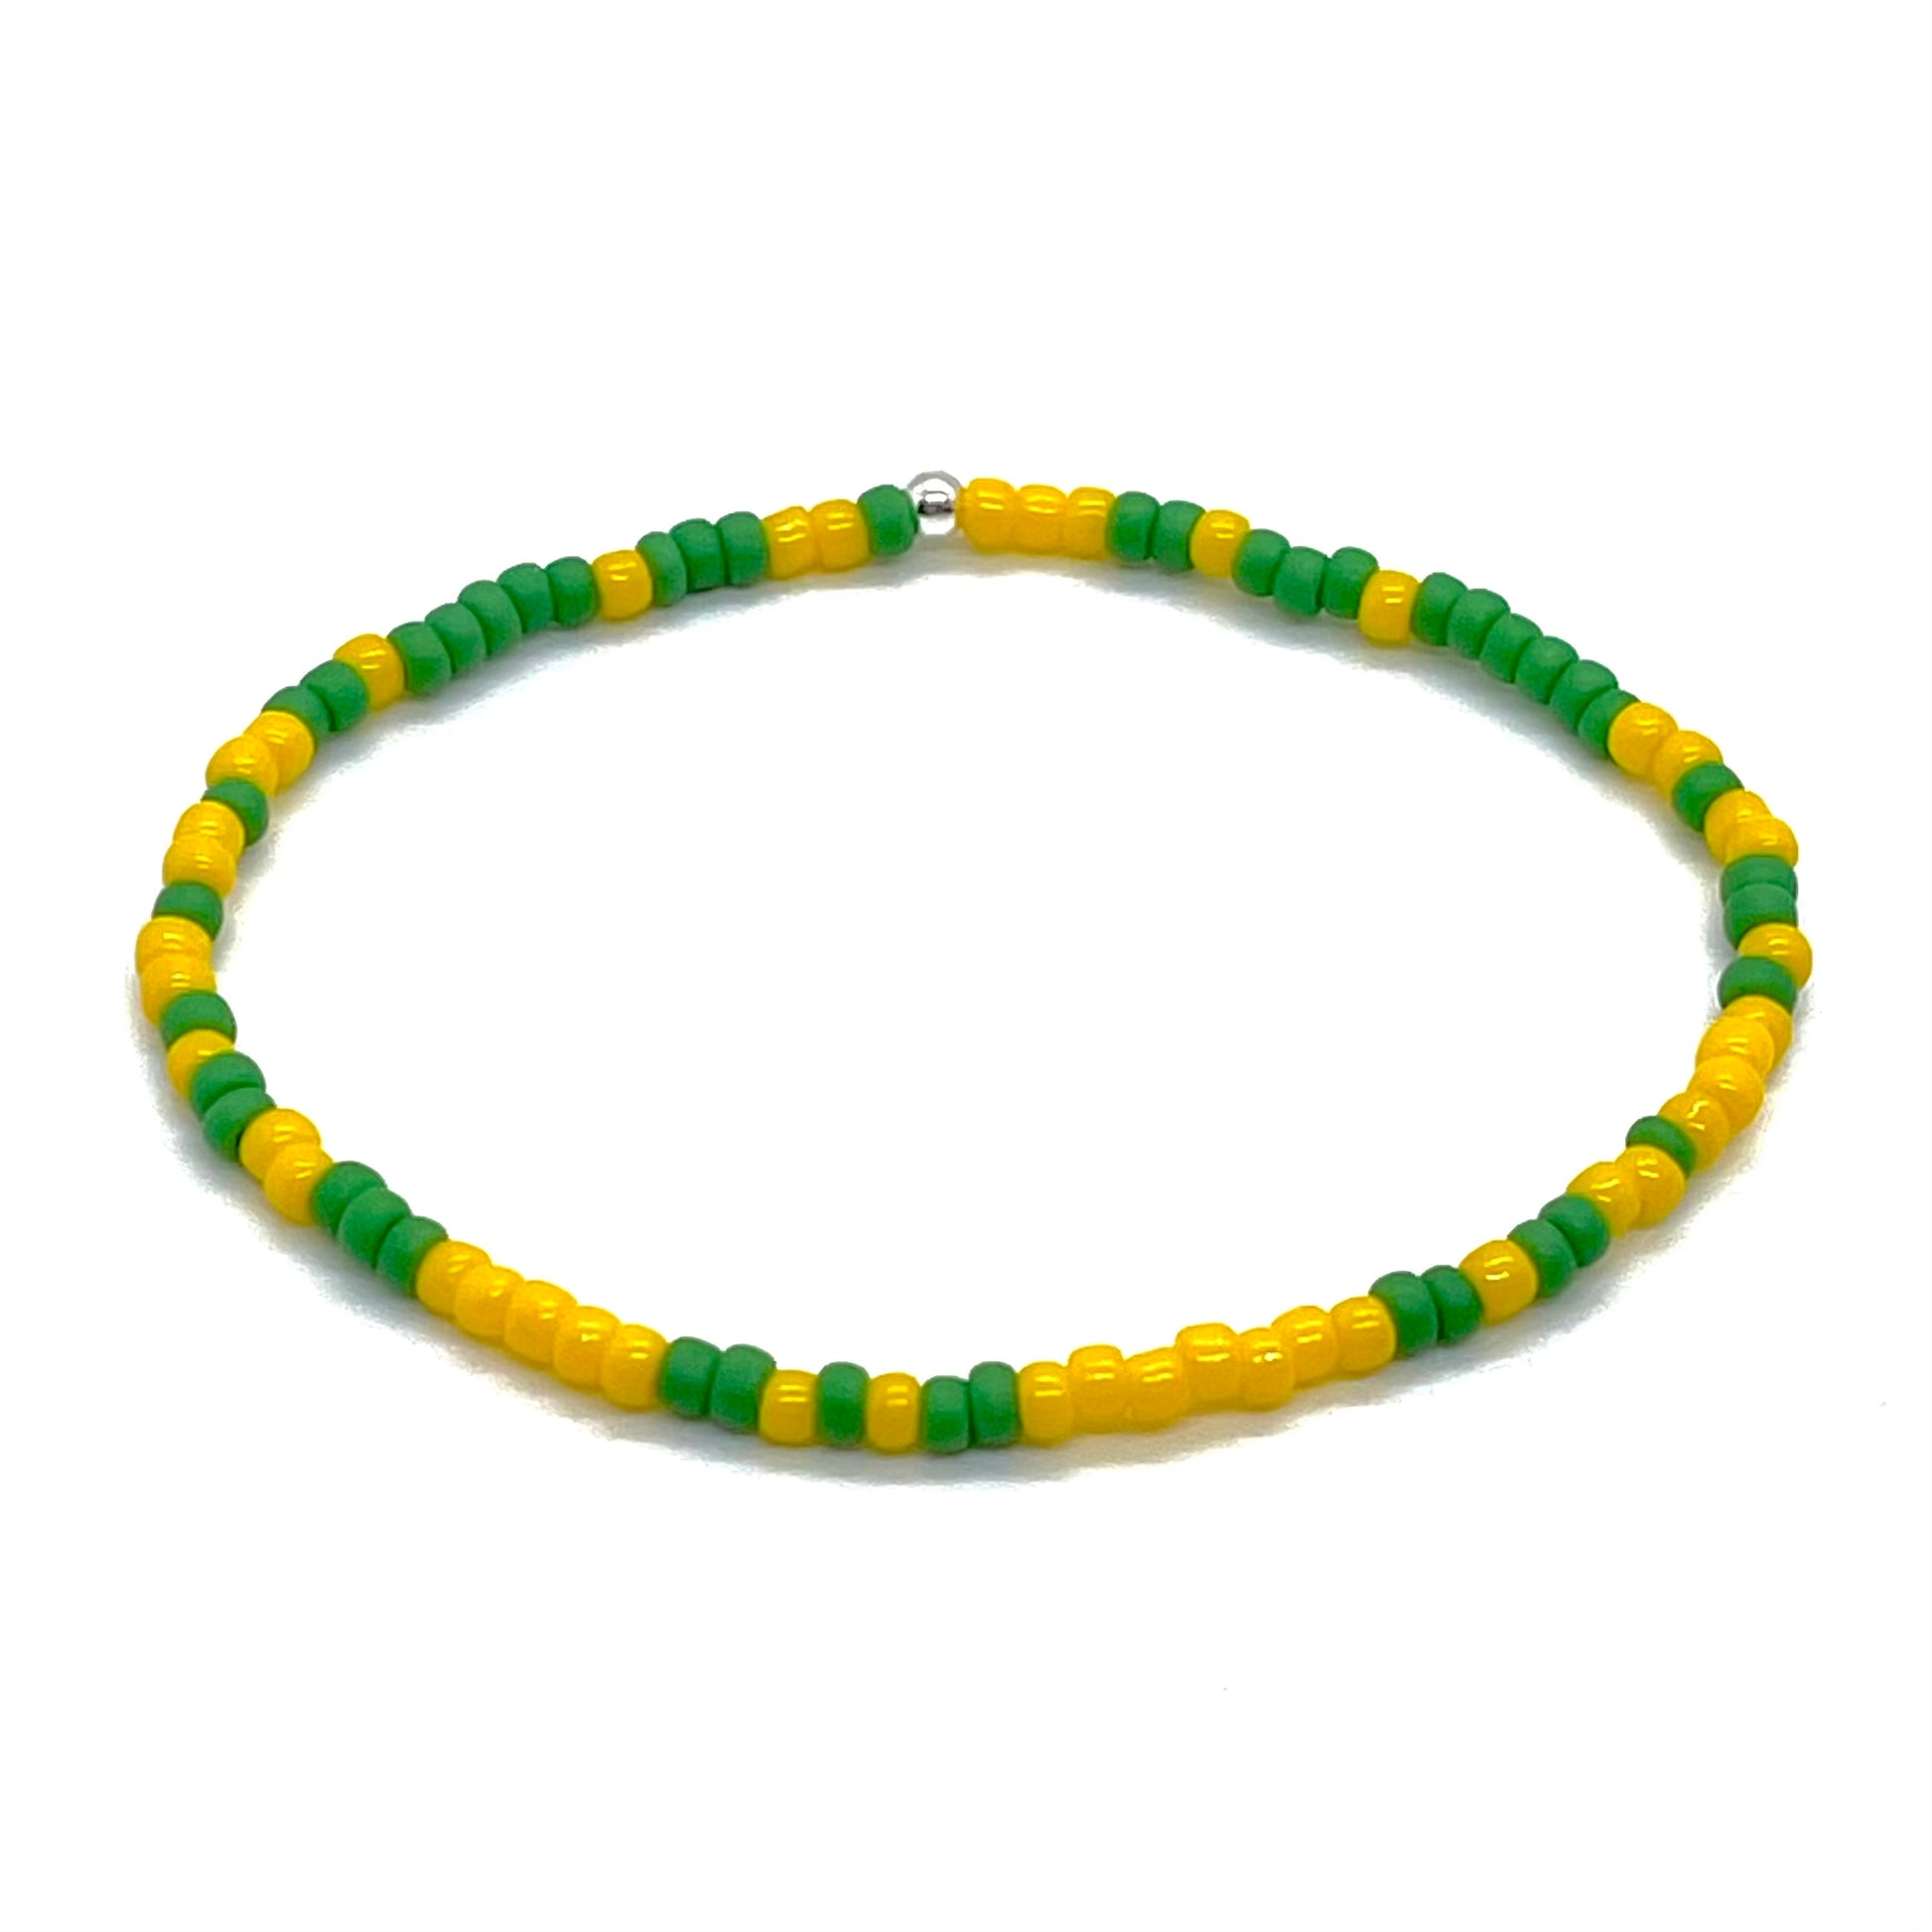 Green and yellow bracelet for men with colorblocks. Skinny seed bead stretch bracelet.